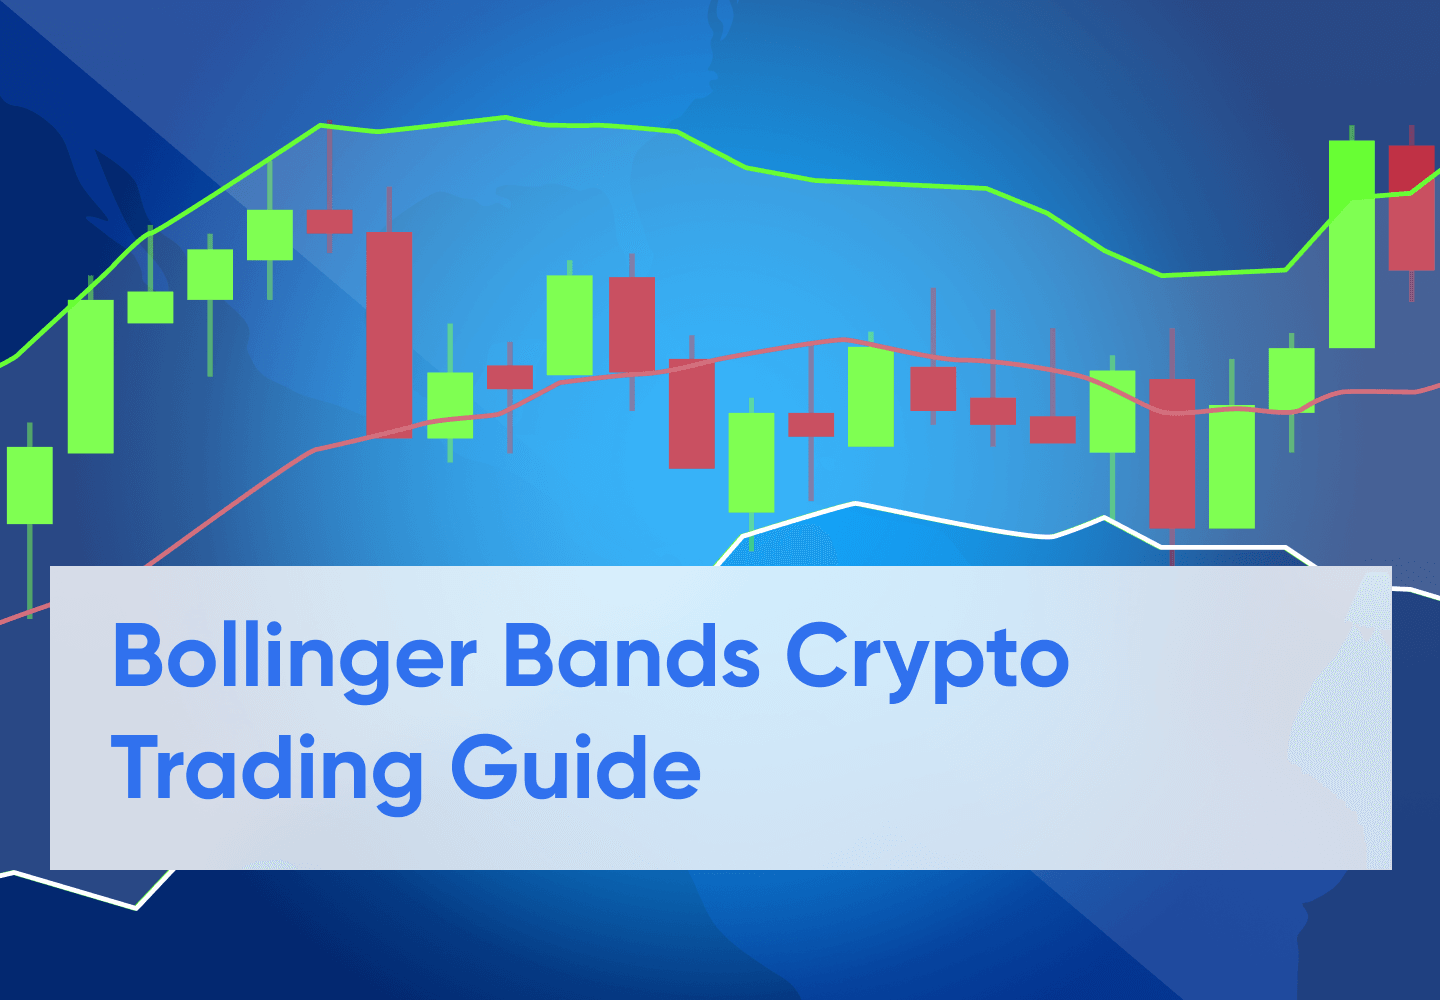 Best bollinger band settings for crypto 2013 year bitcoin price